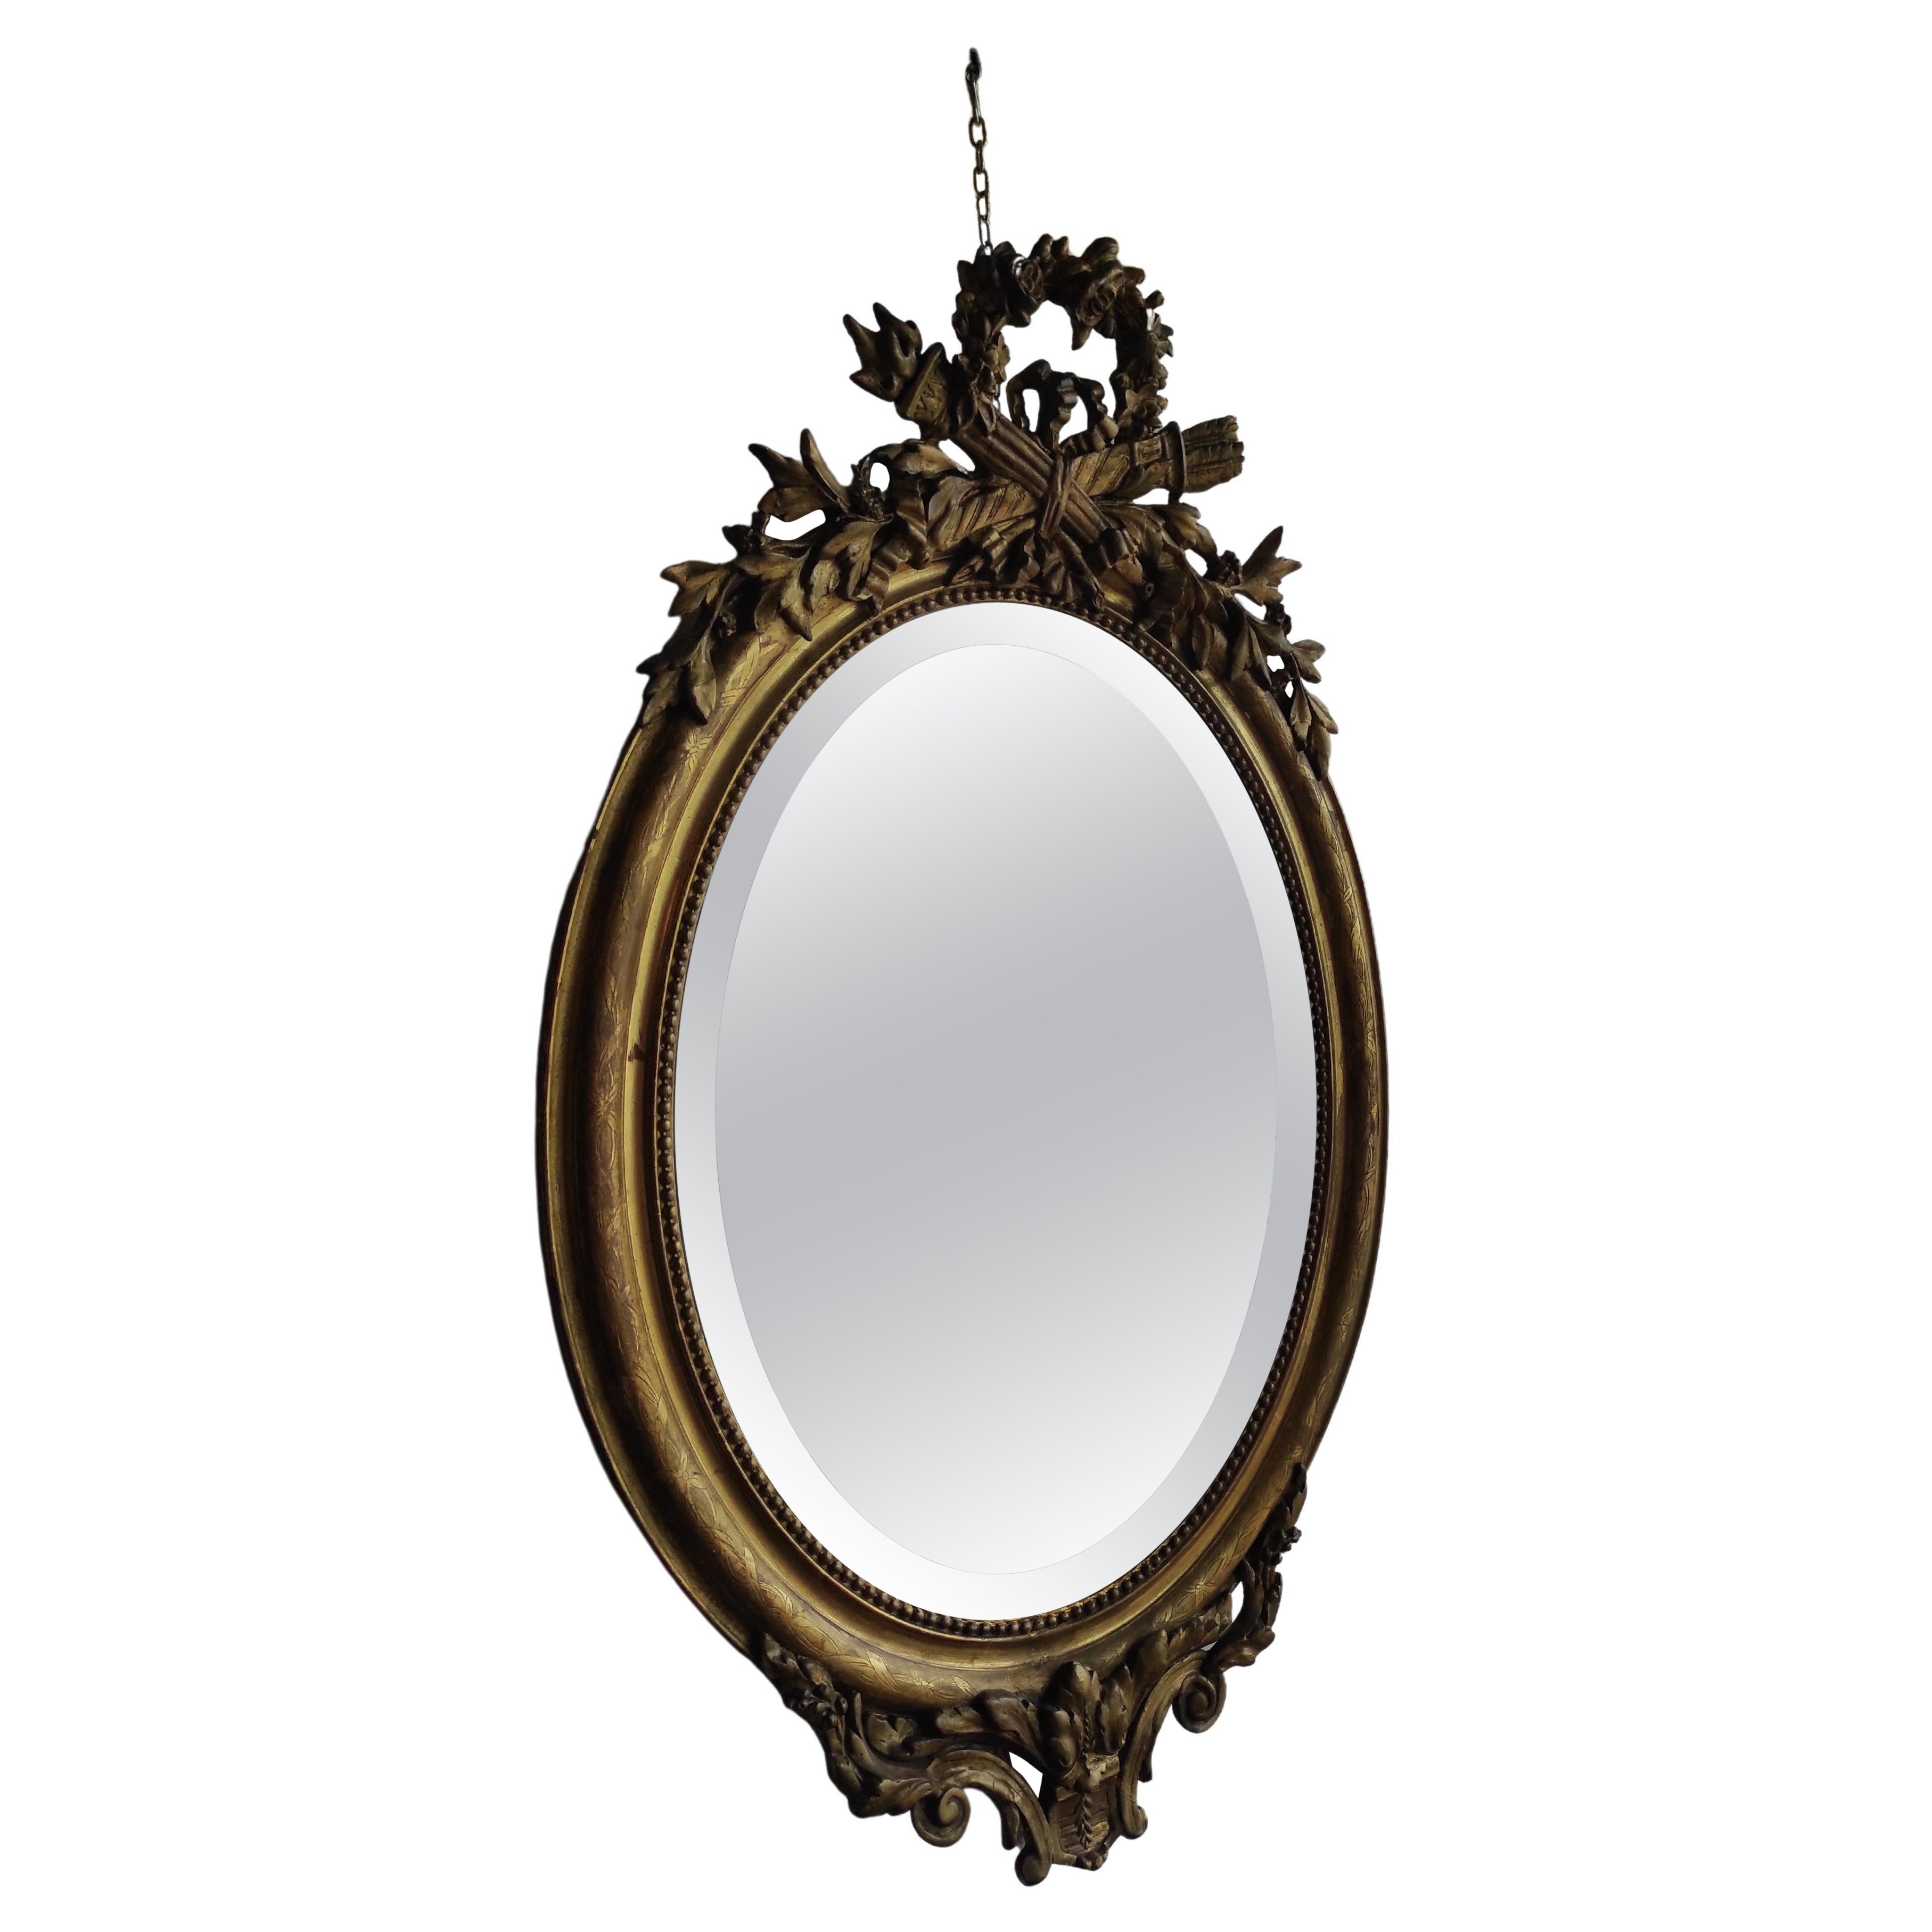 Golden oval mirror For Sale